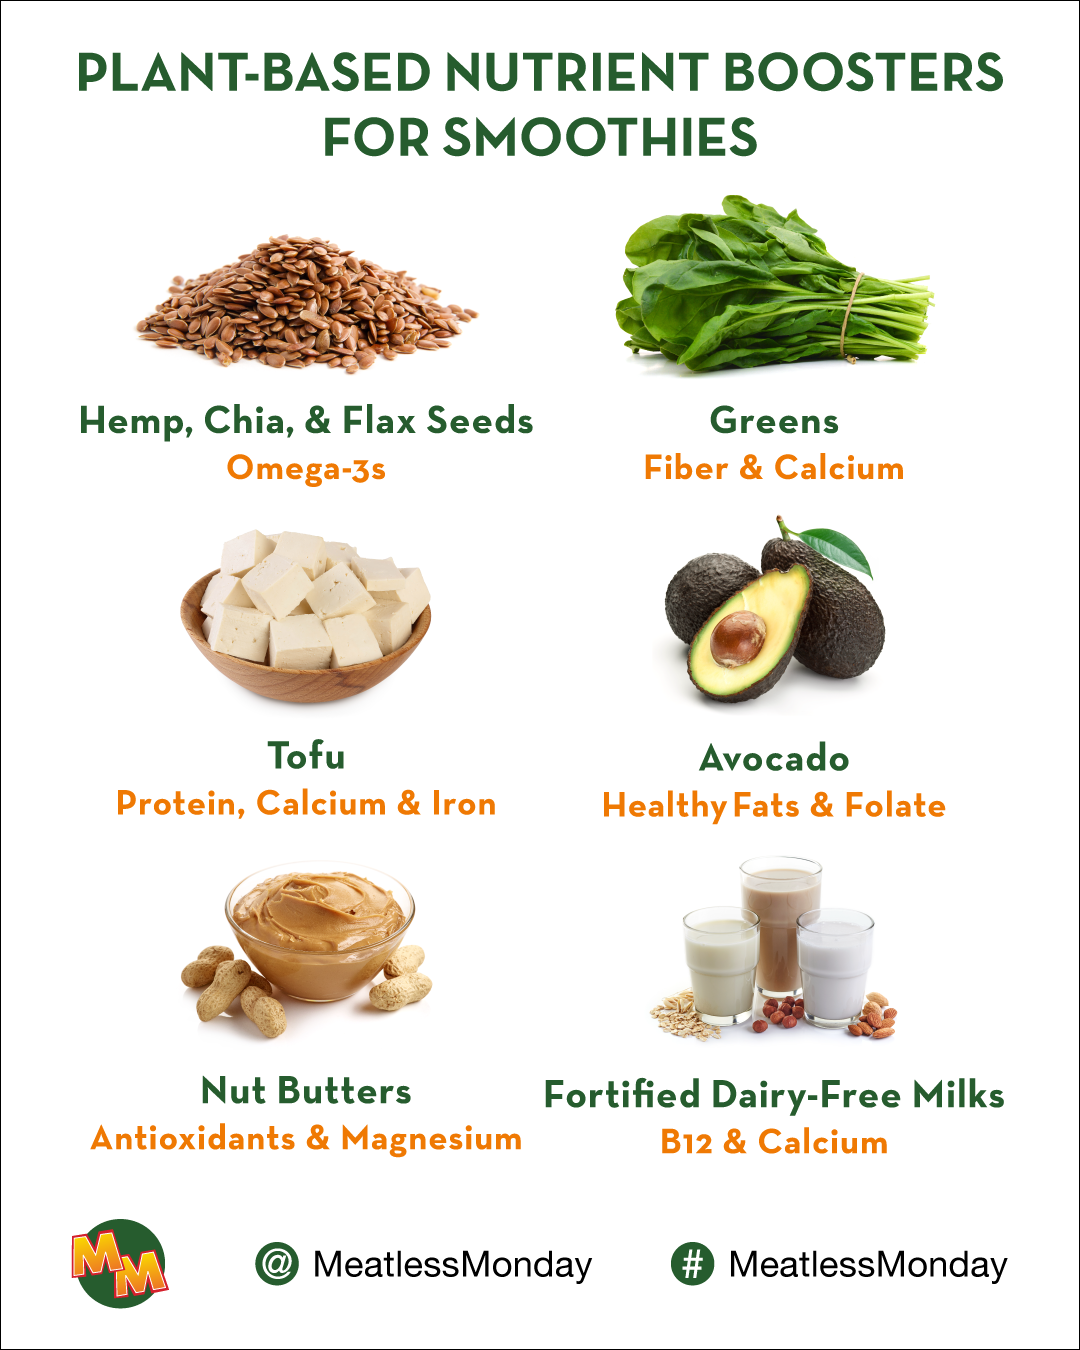 Plant-based nutrient boosters for smoothies